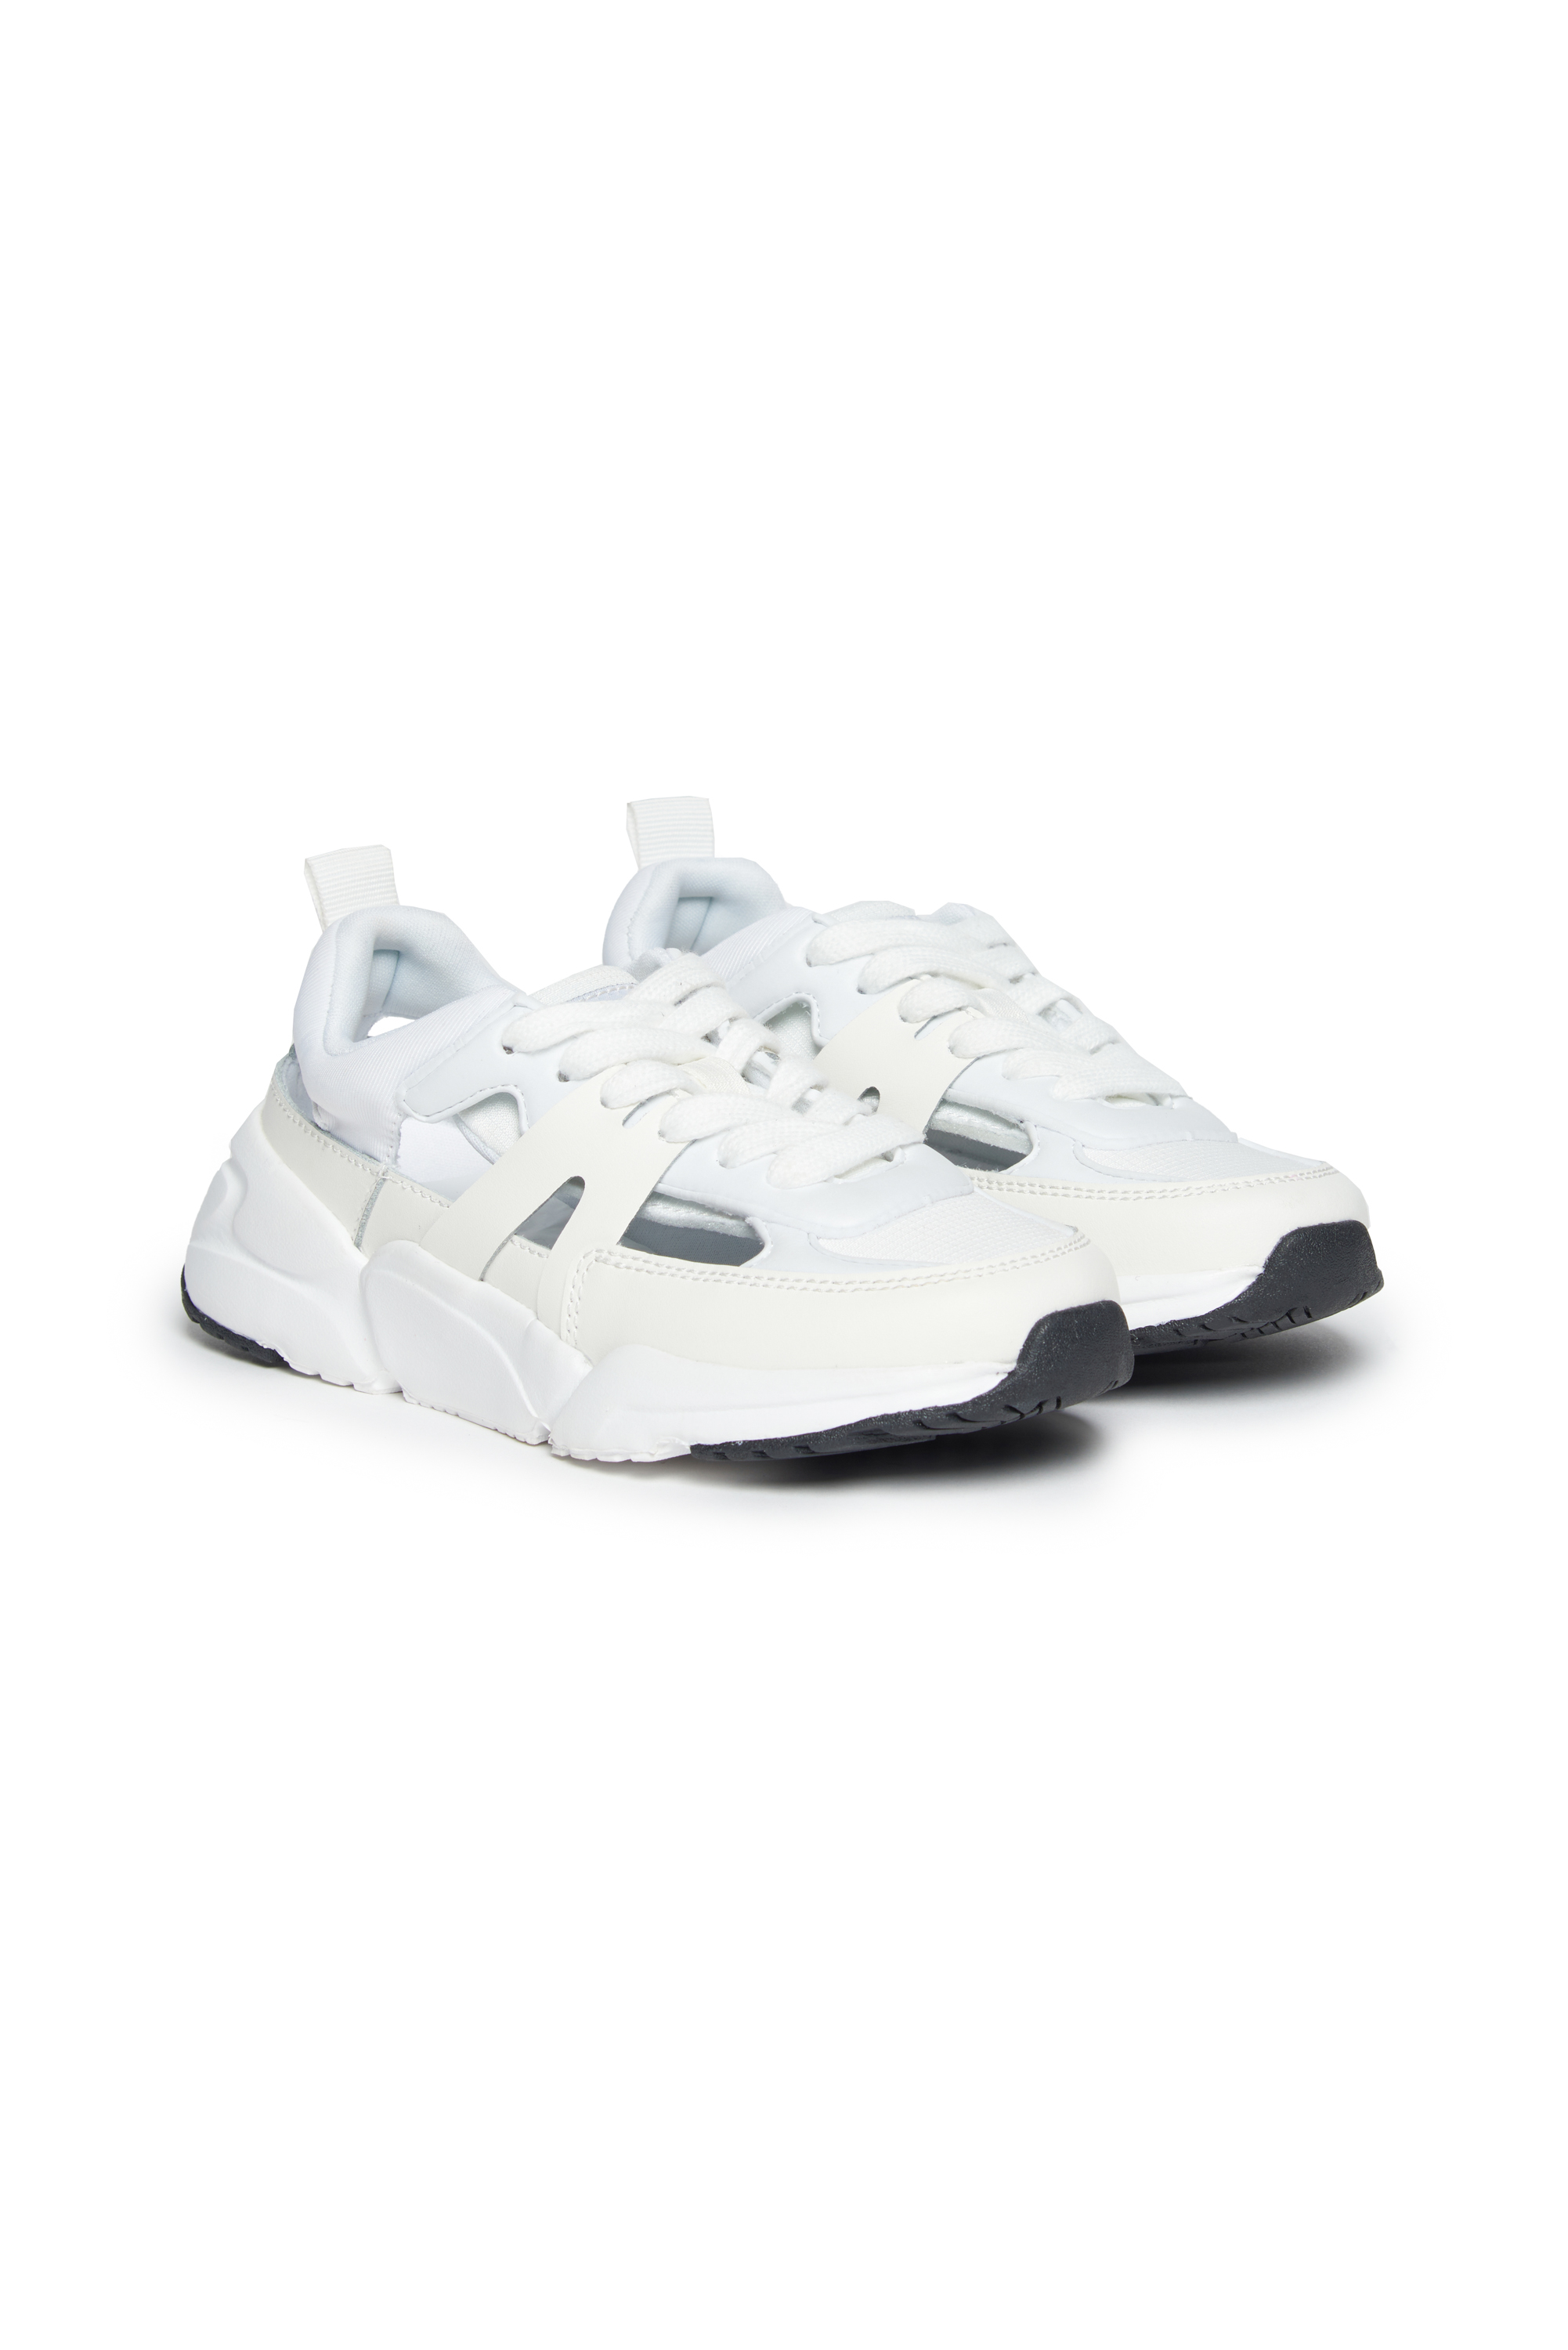 Diesel - S-MILLENIUM LCS PRO, Unisex Sandal sneaker in ripstop and leather in White - Image 2